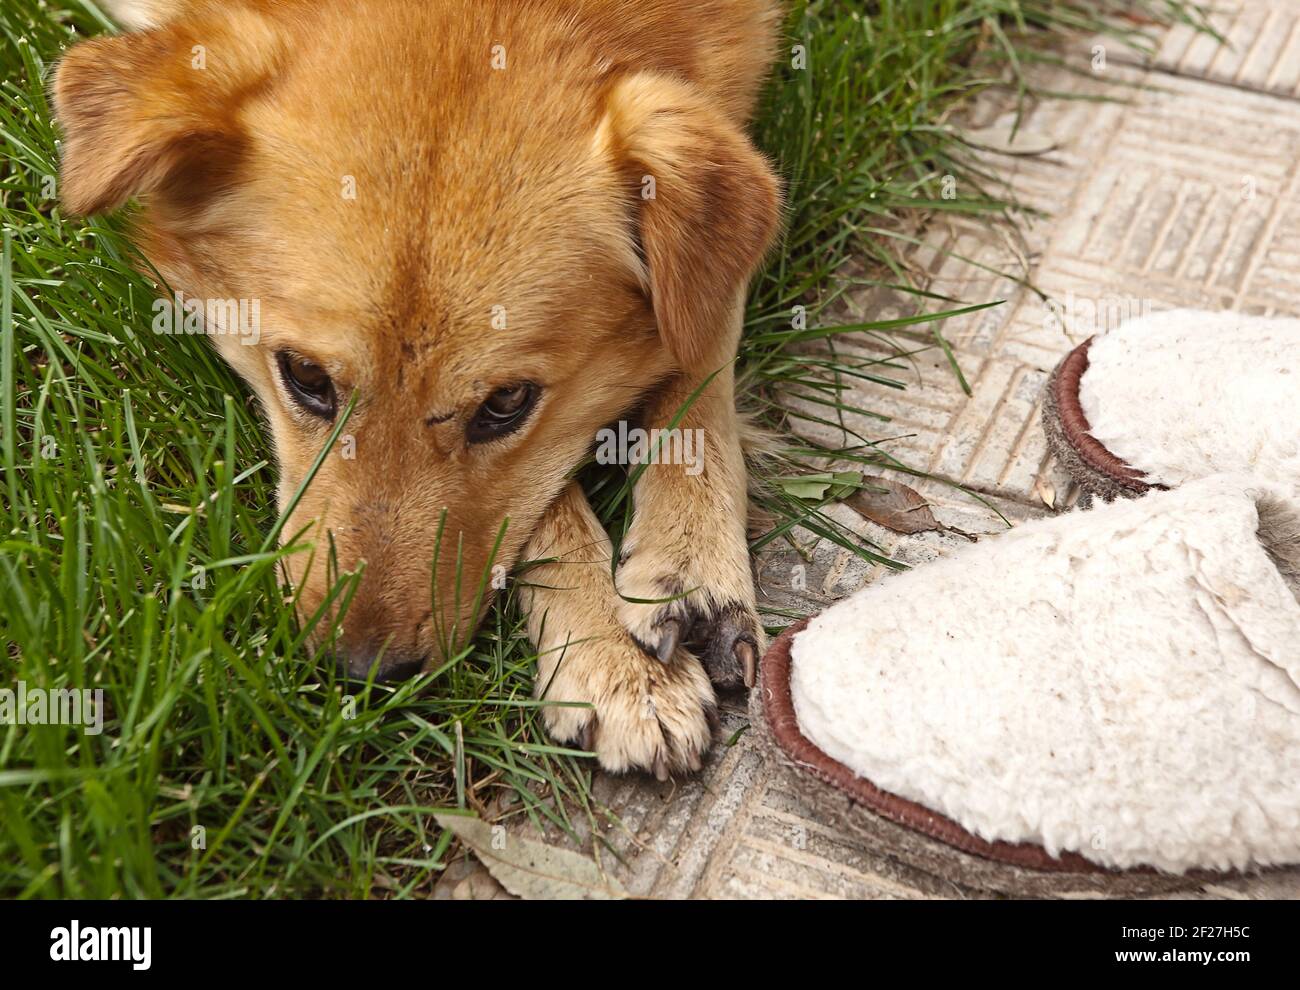 Dog sad about Slippers Stock Photo